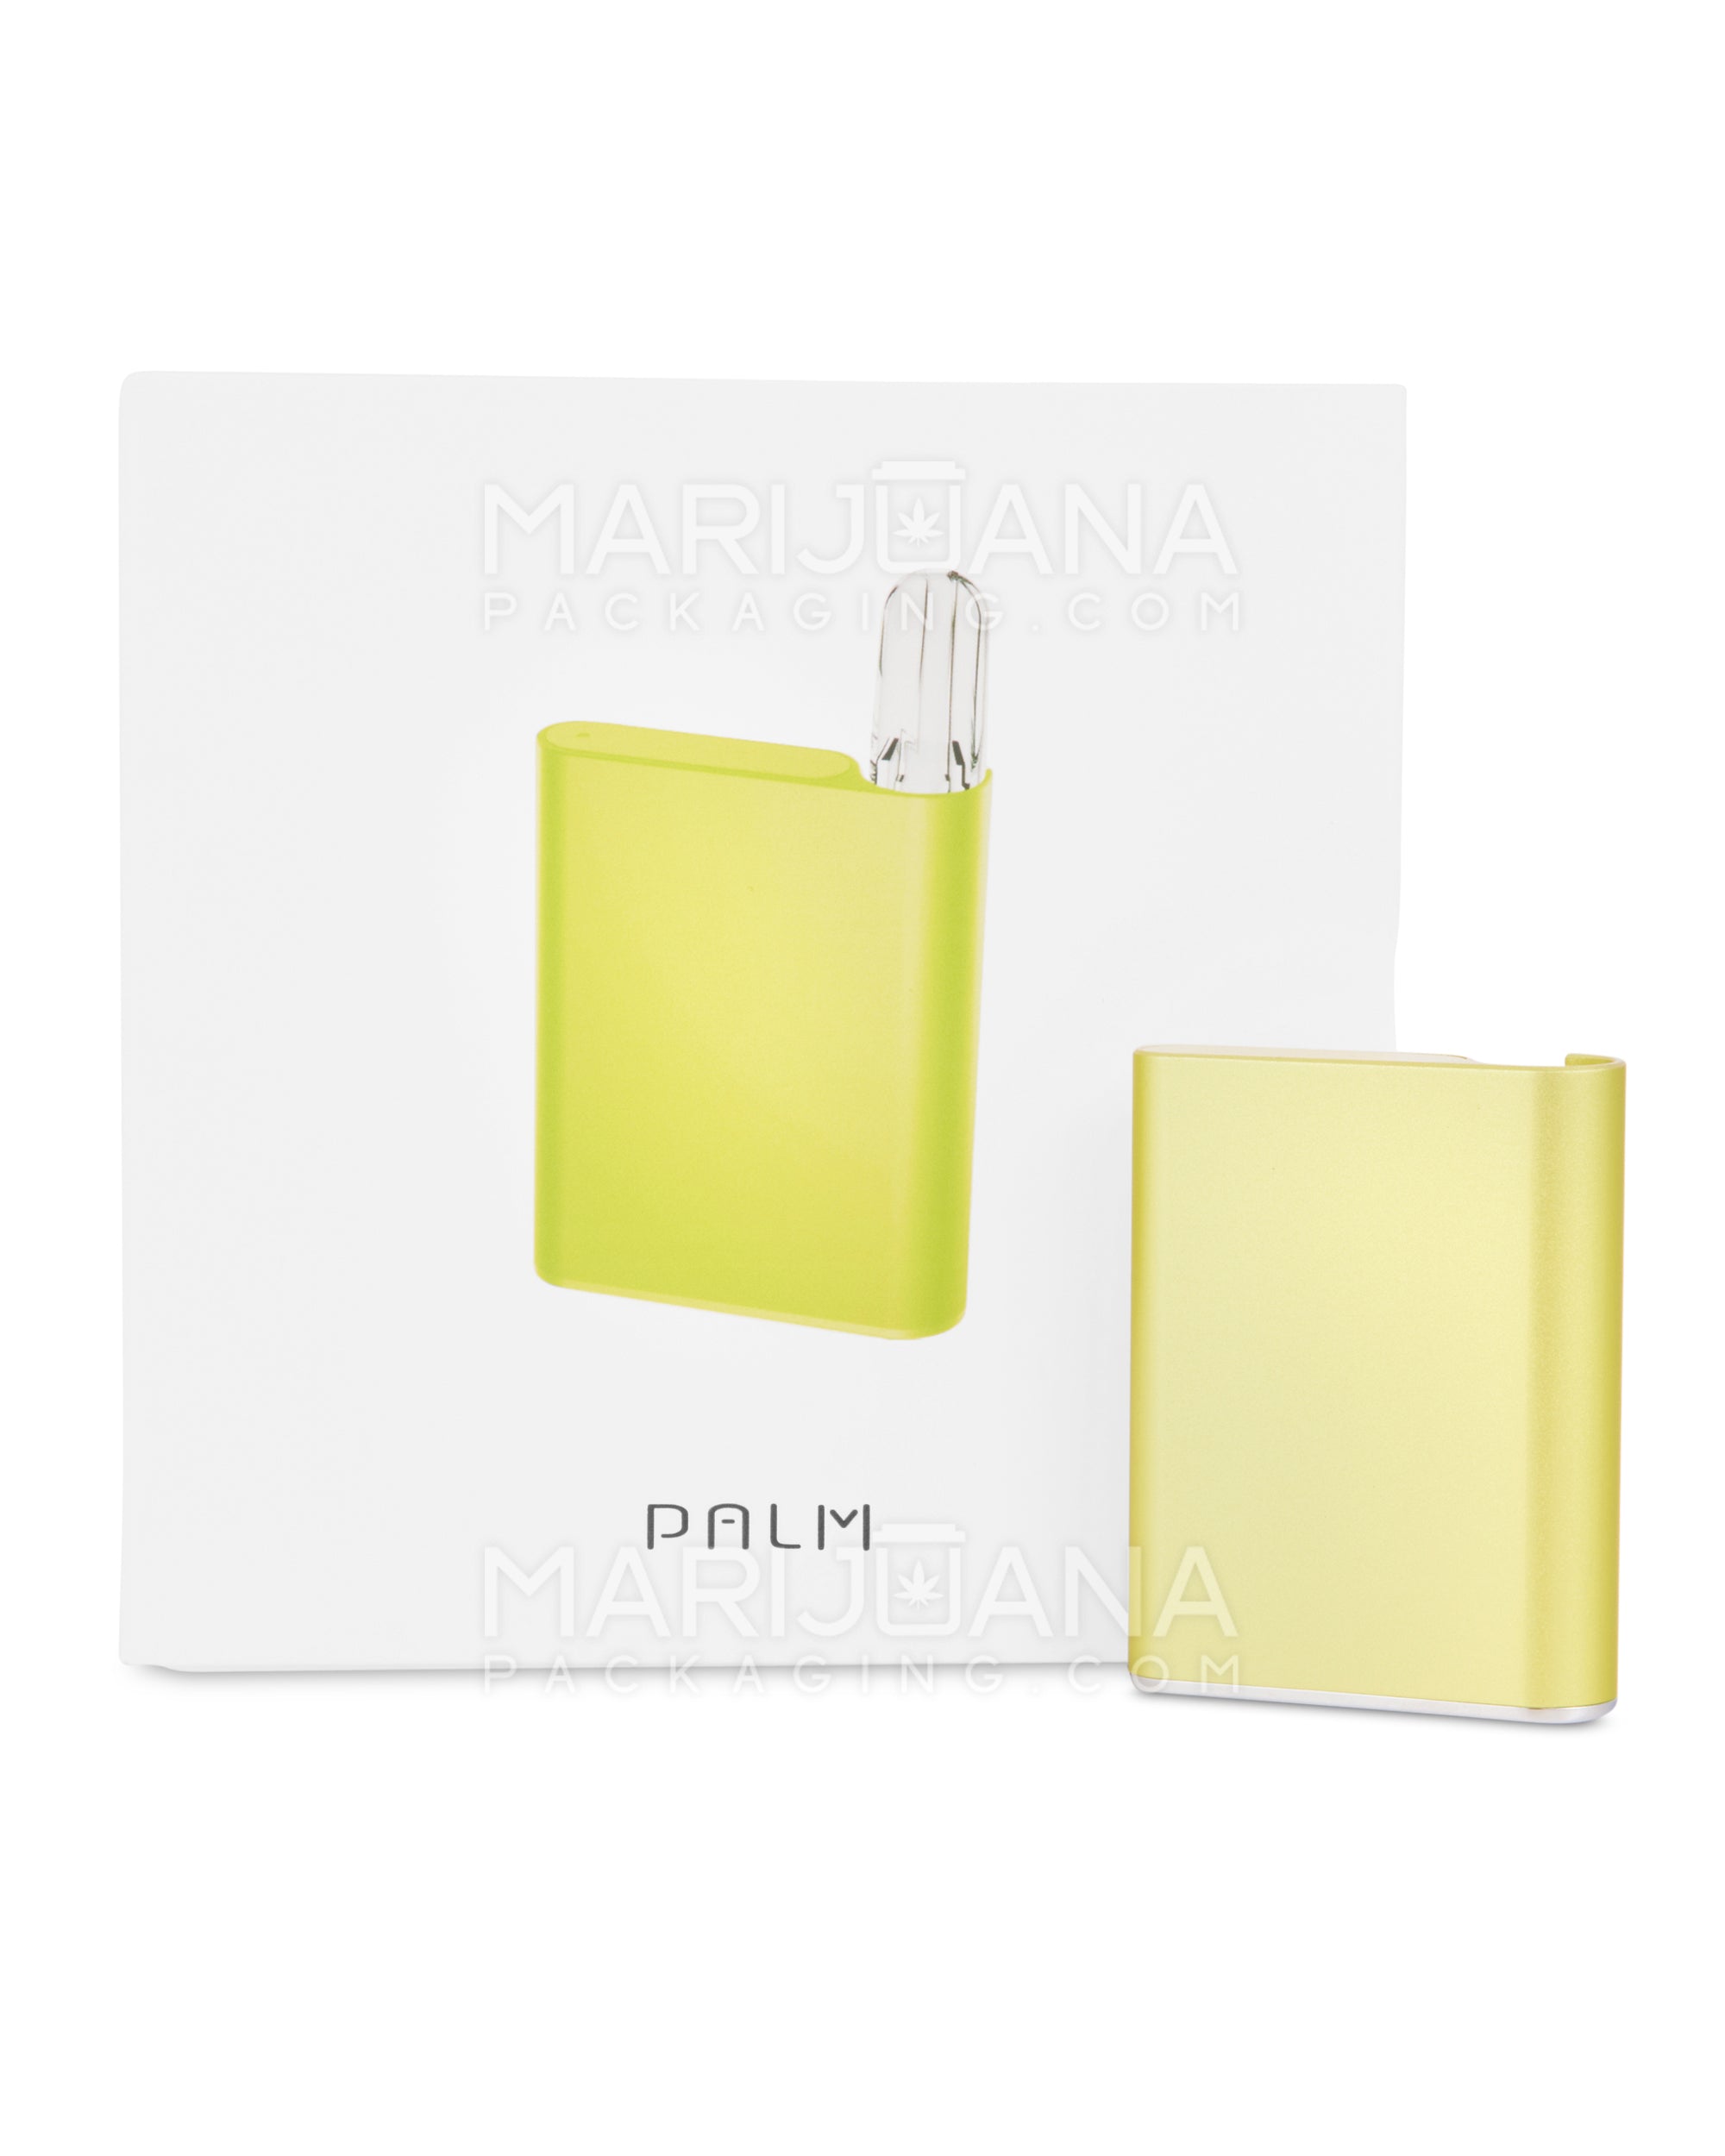 CCELL | Palm Vape Battery with USB Charger | 500mAh - Electric Yellow - 510 Thread - 1